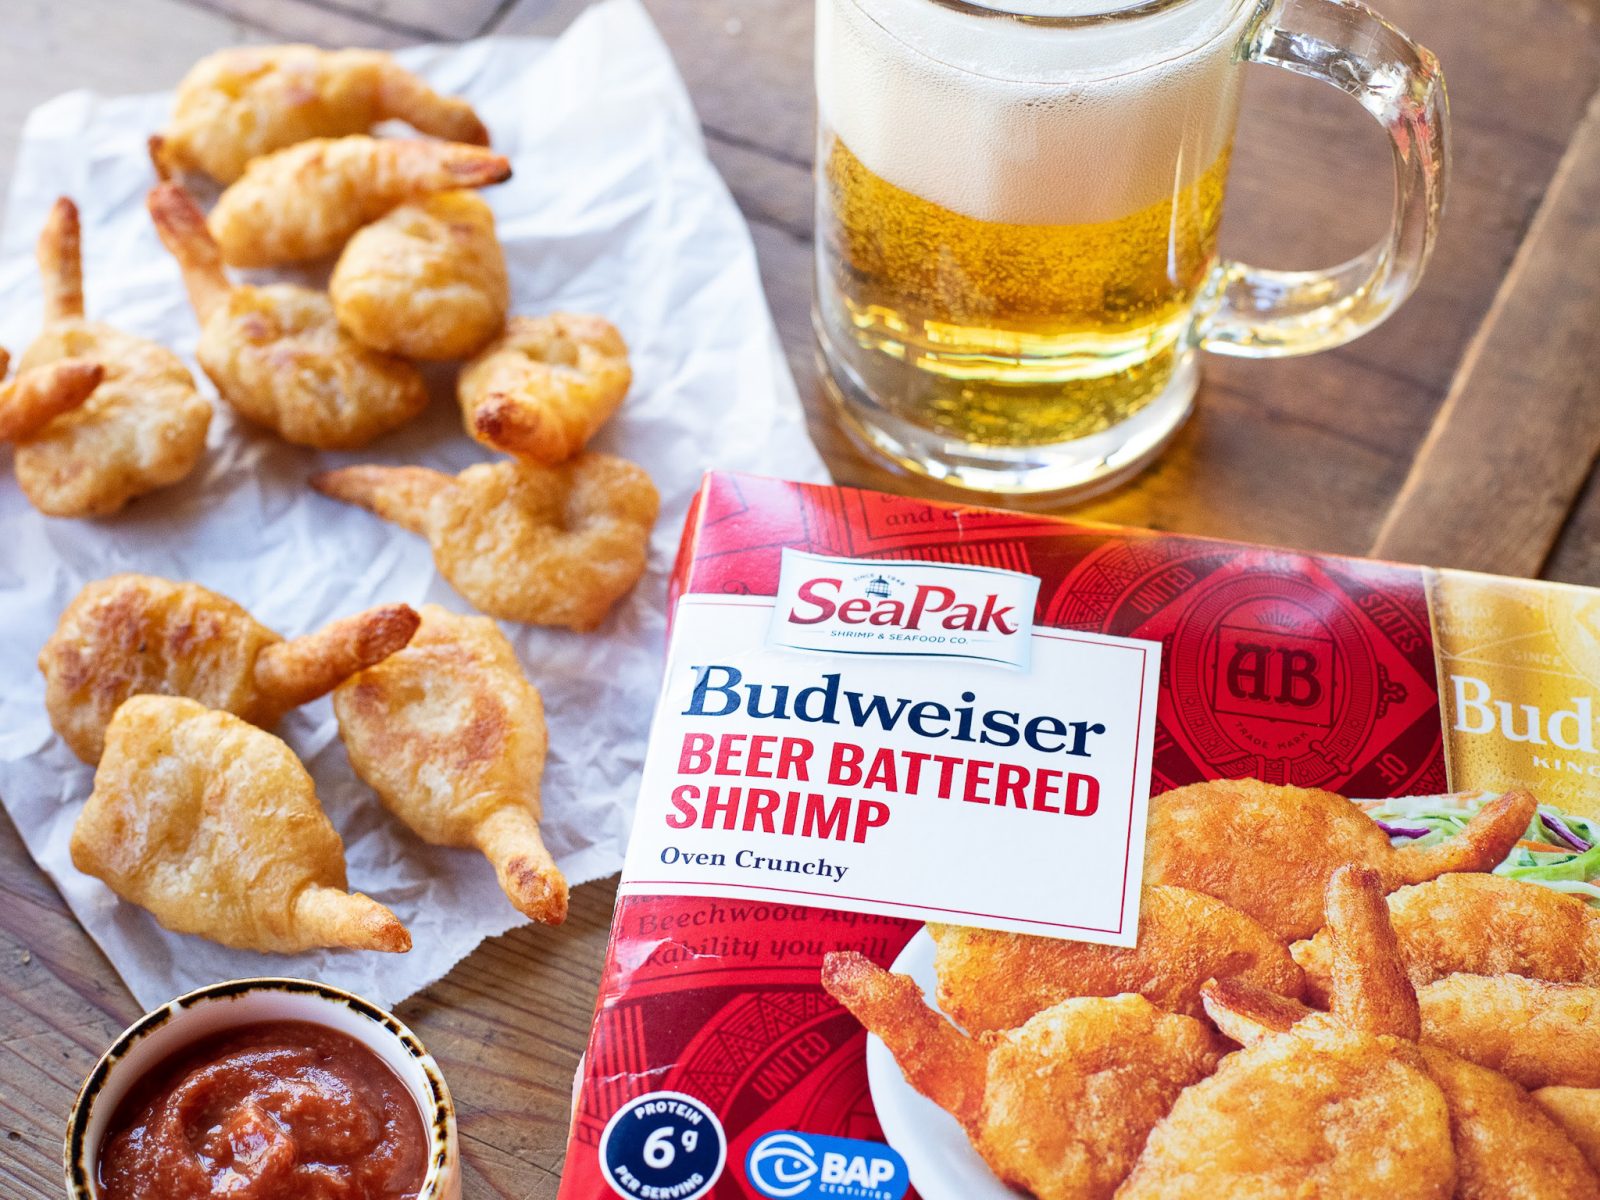 Grab Budweiser Appetizers For Just $4.99 At Kroger